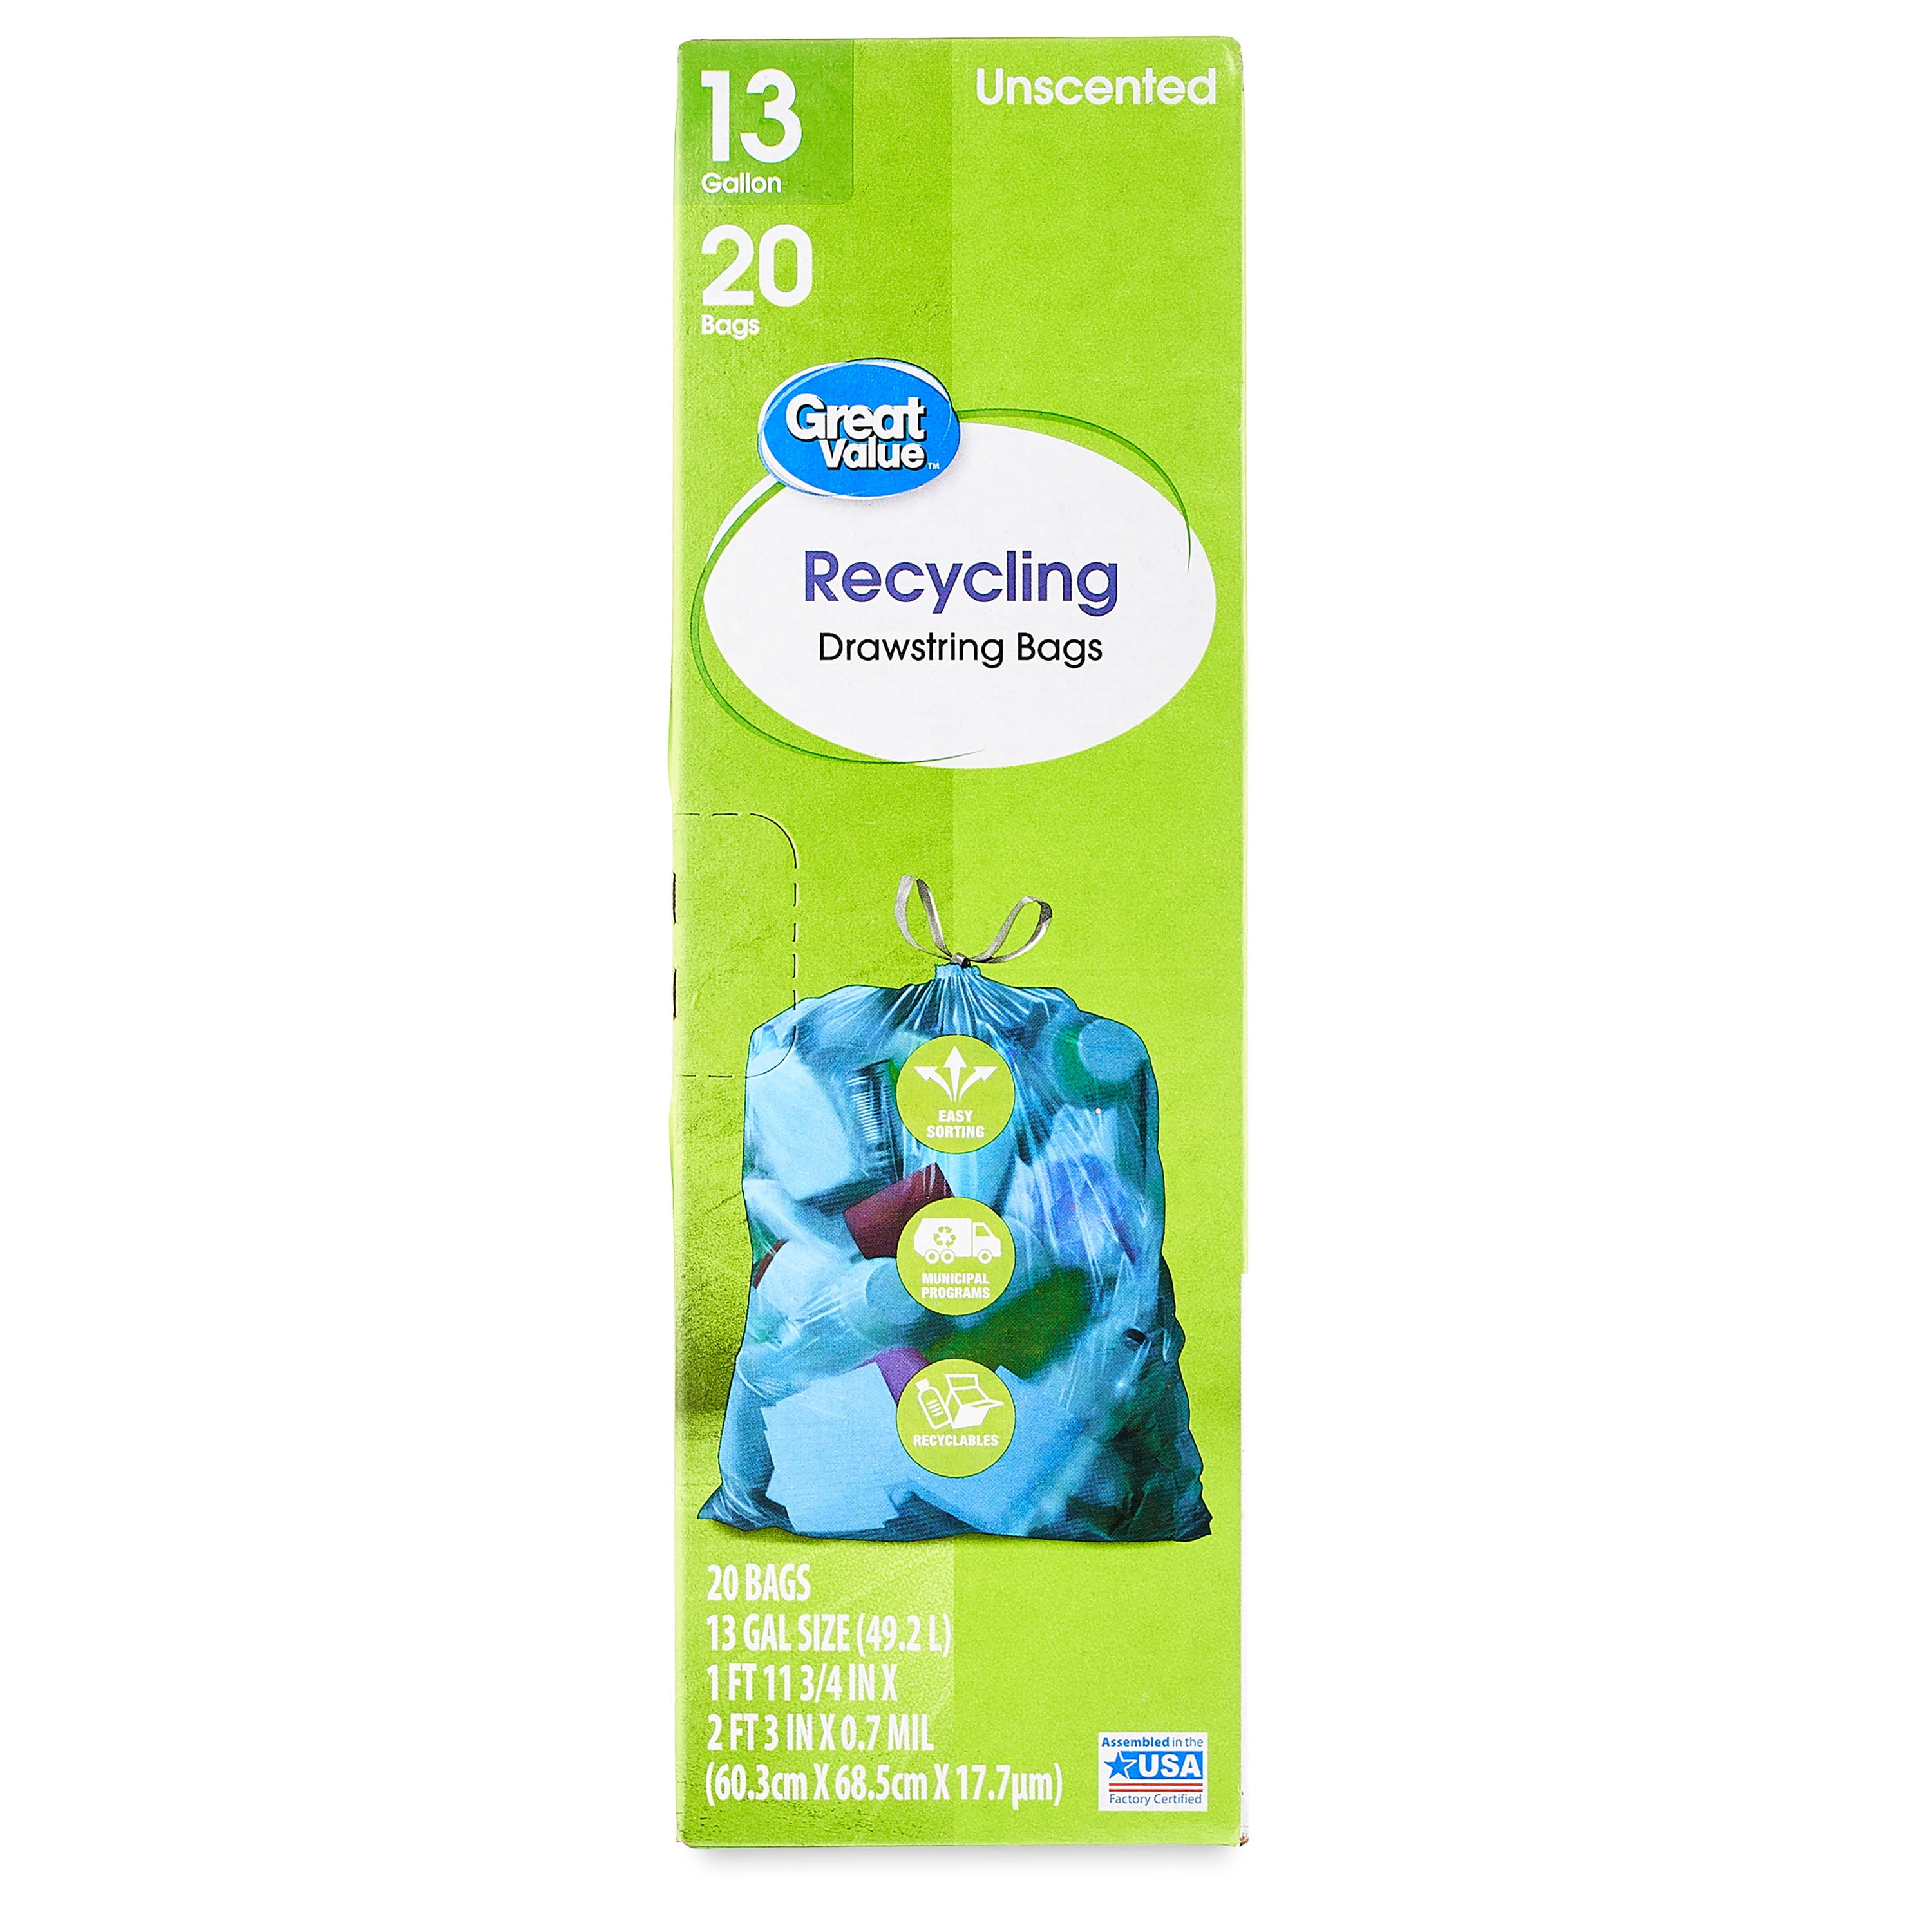 Great Value Blue 13-Gallon Drawstring Tall Kitchen Recycling Bags, Unscented, 20 Count